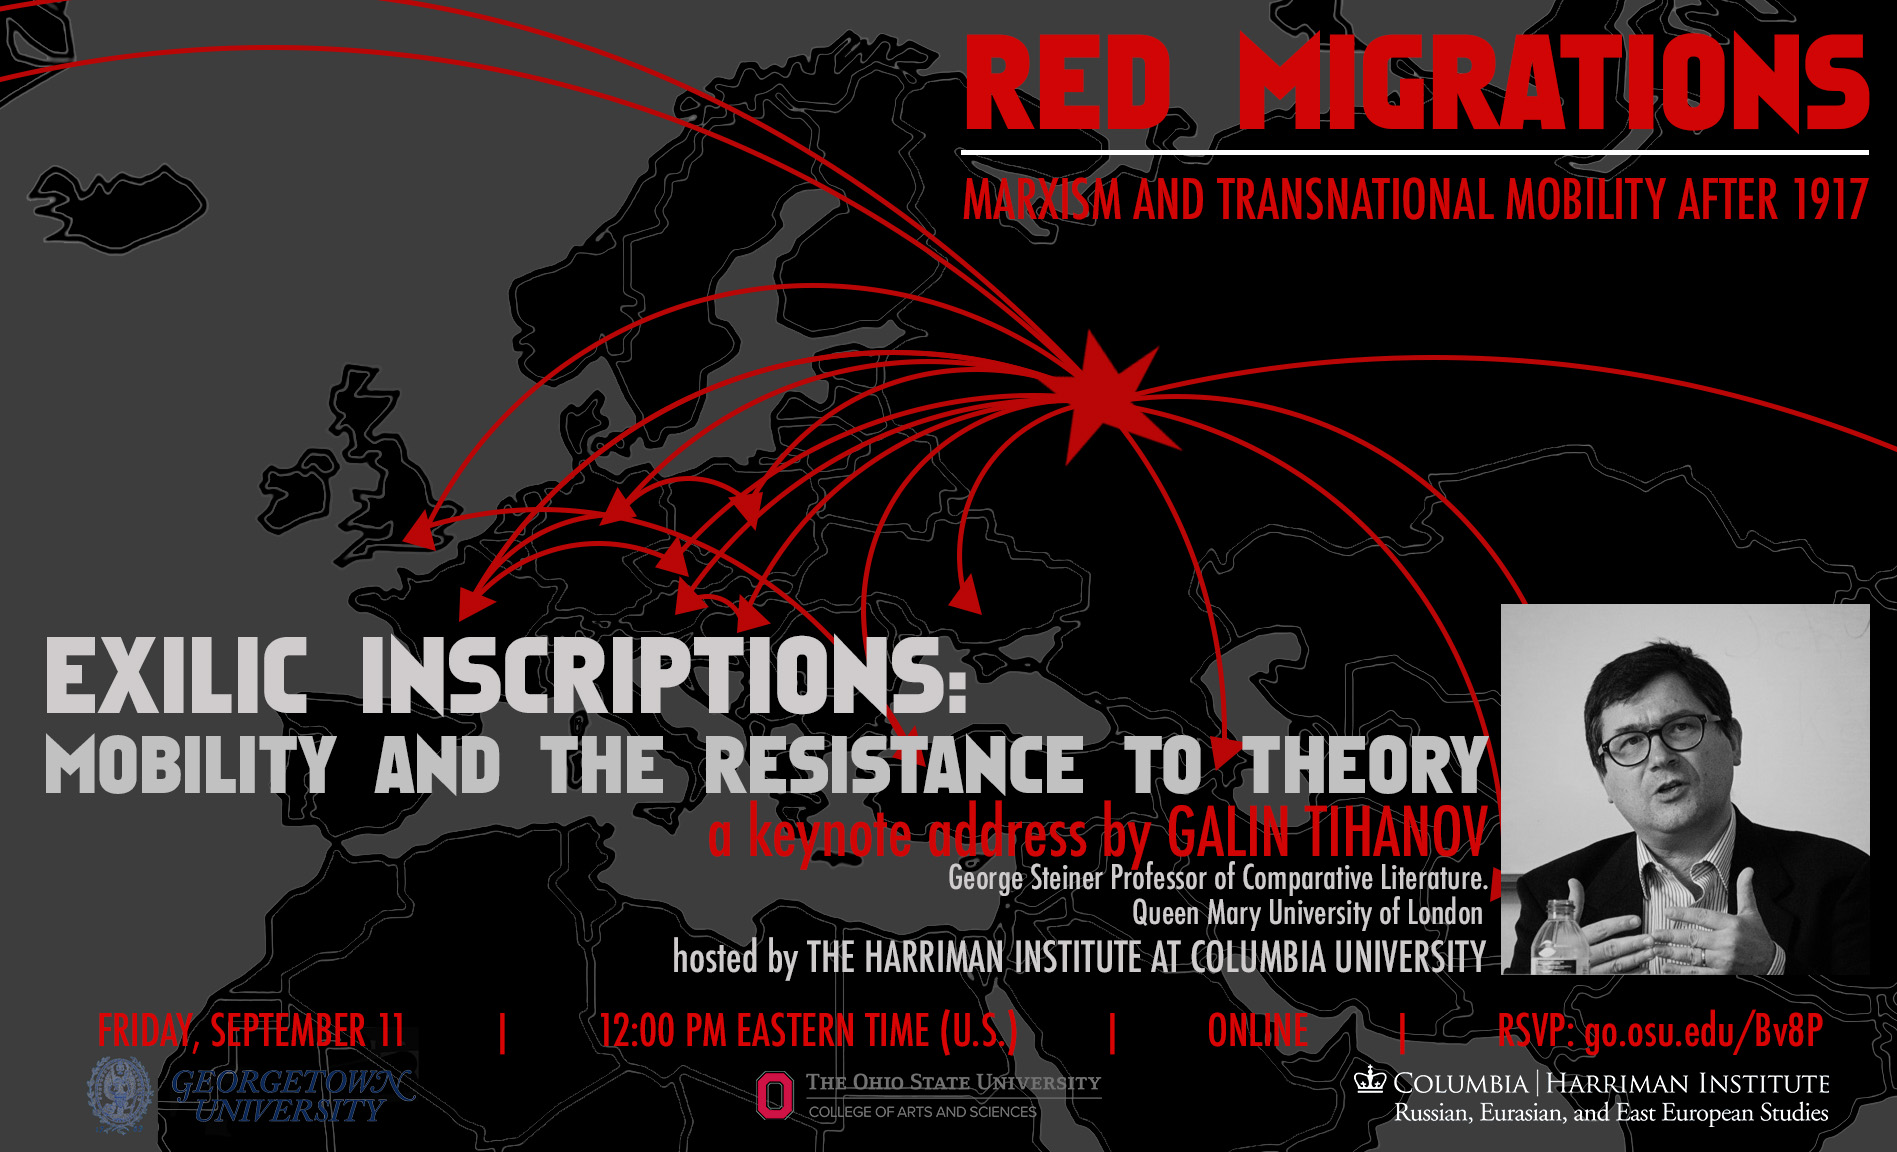 A poster for Red Migrations conference including photograph of Galin Tihanov